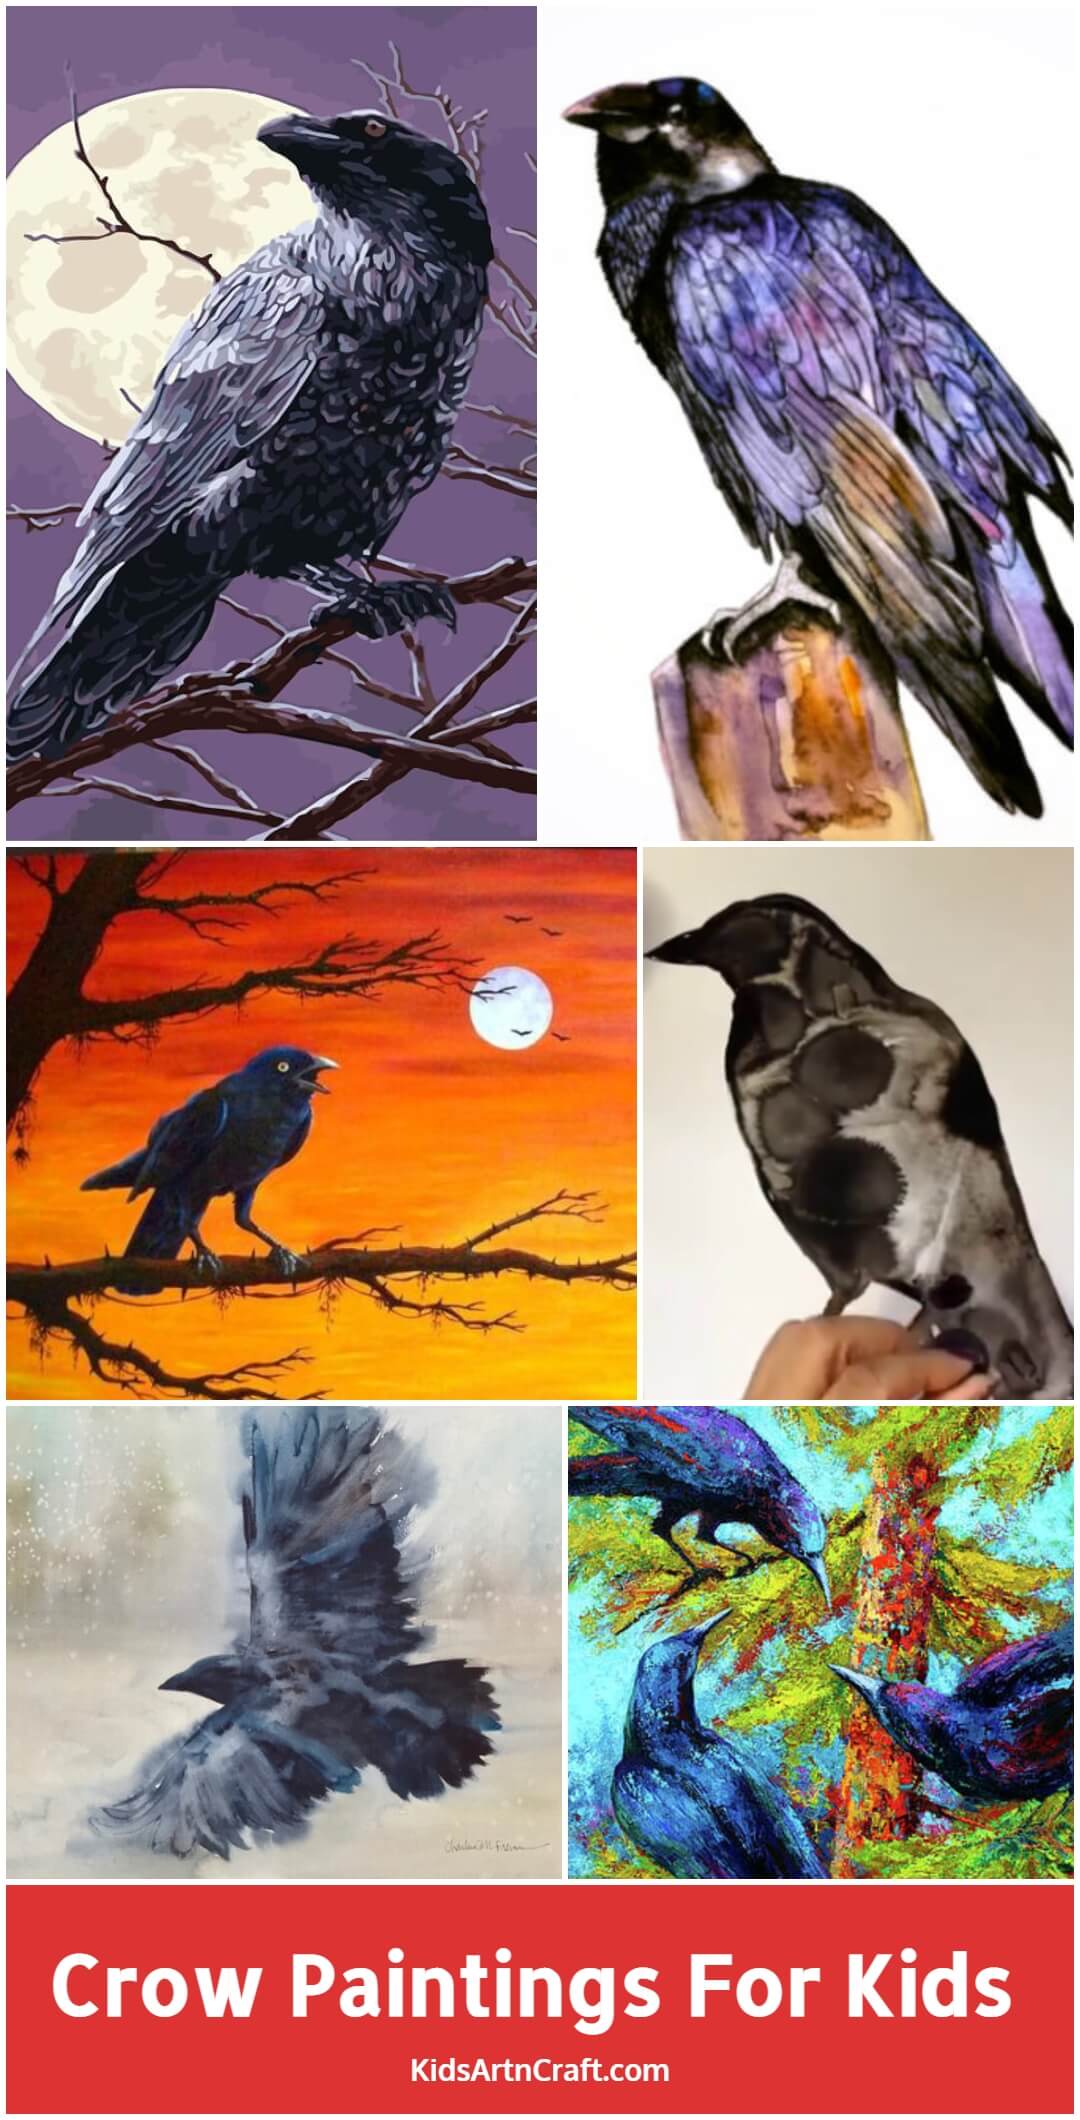 Crow Paintings for Kids